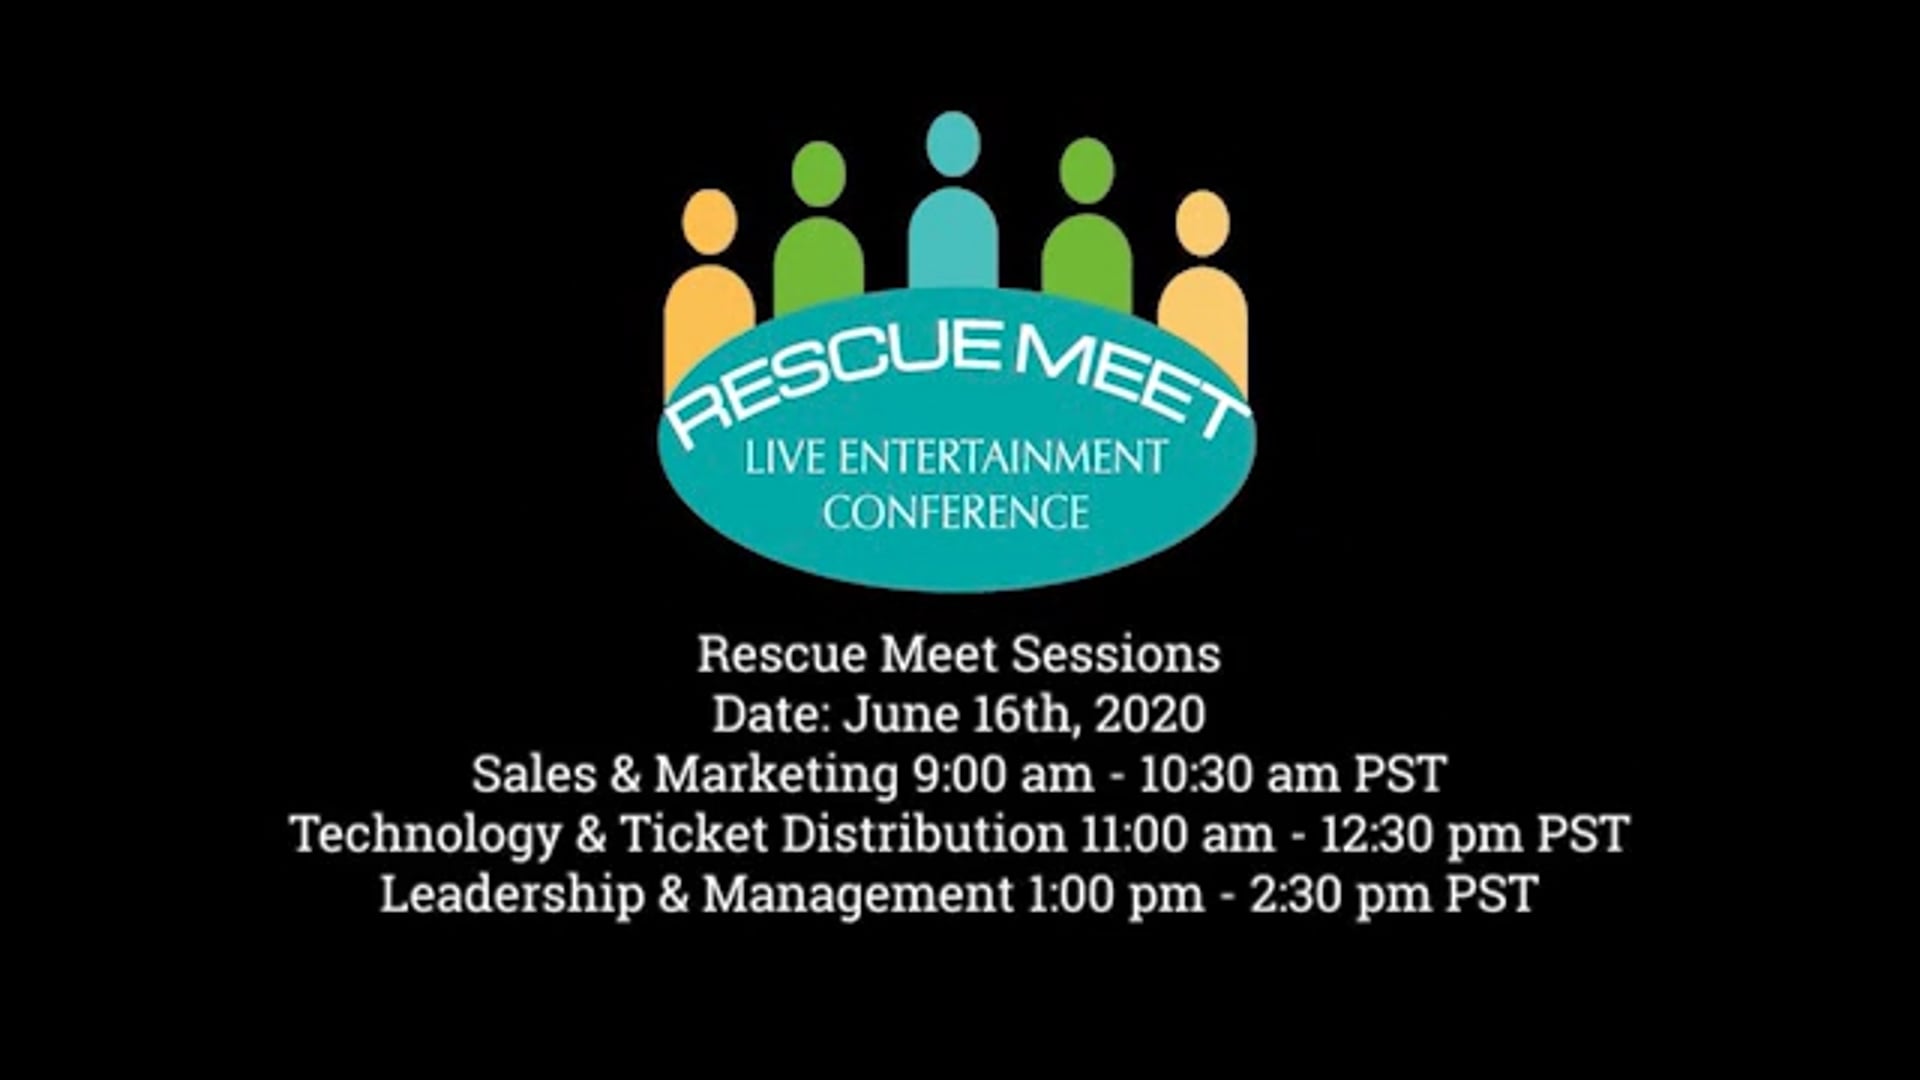 Rescue Meet Sessions: Leadership & Management